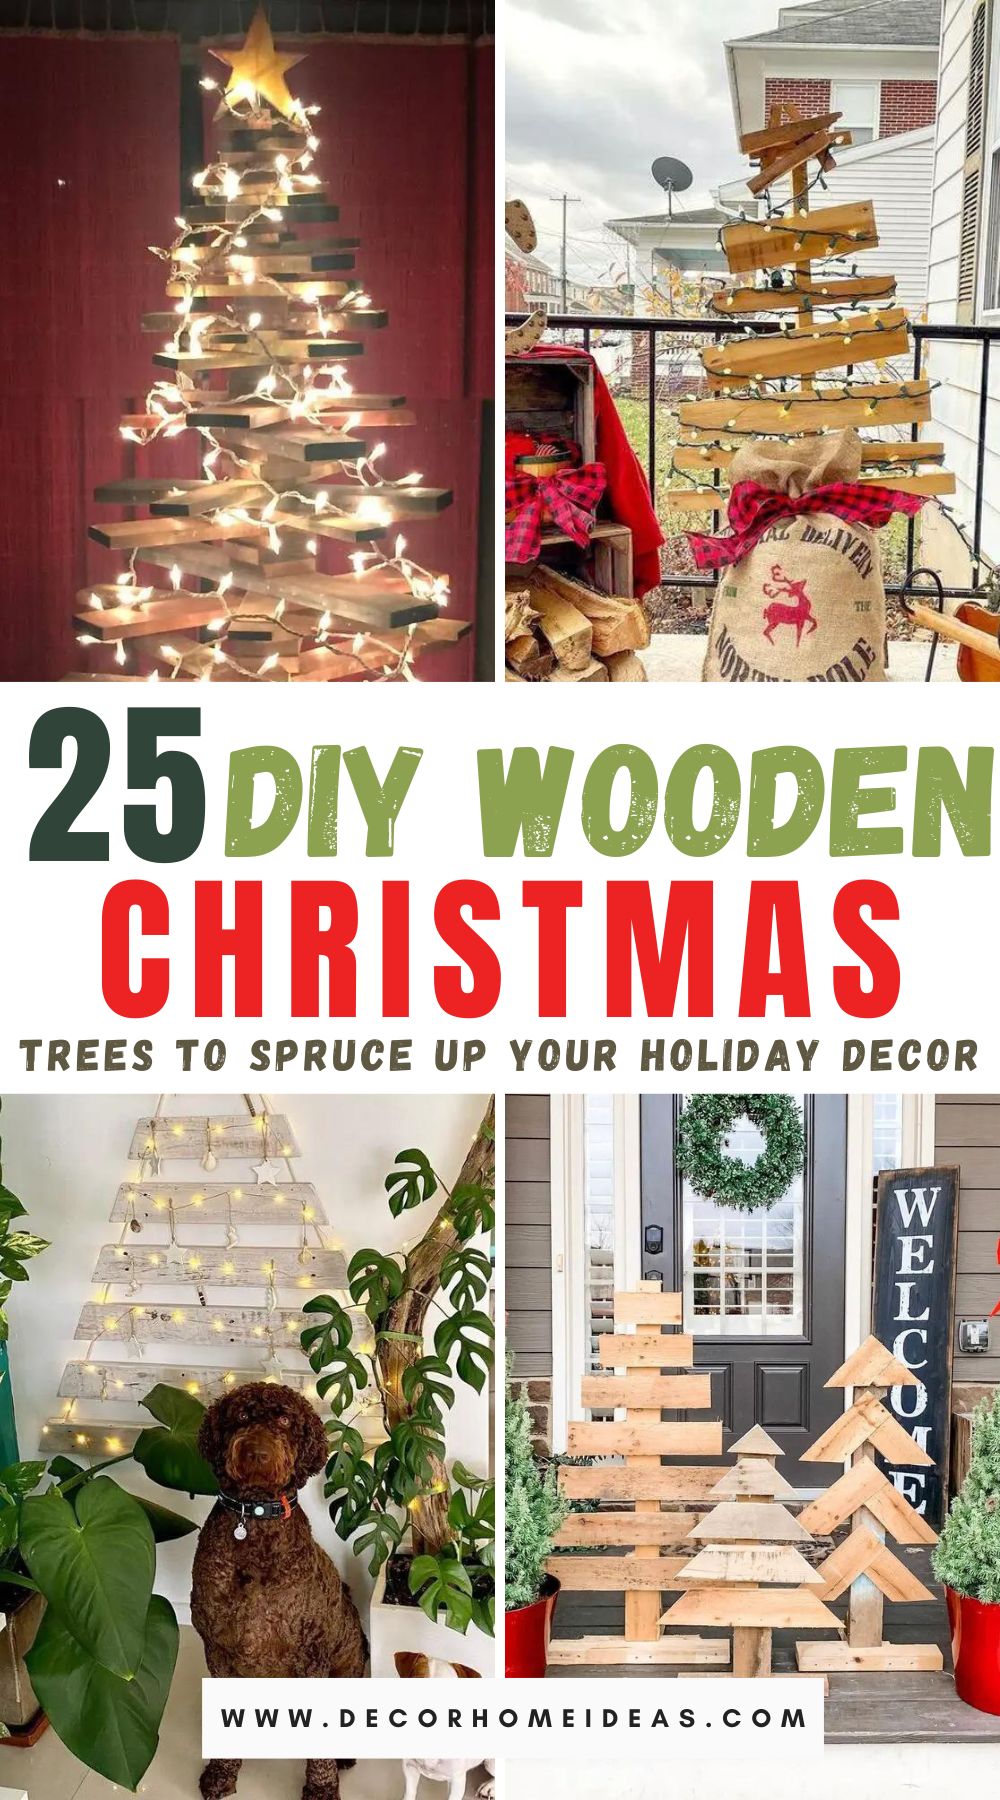 Explore 25 inventive DIY wooden Christmas tree ideas that will add a touch of rustic charm to your holiday decor. From pallets to driftwood, discover inspiration to craft your own unique Christmas trees and infuse your home with cozy and festive vibes.